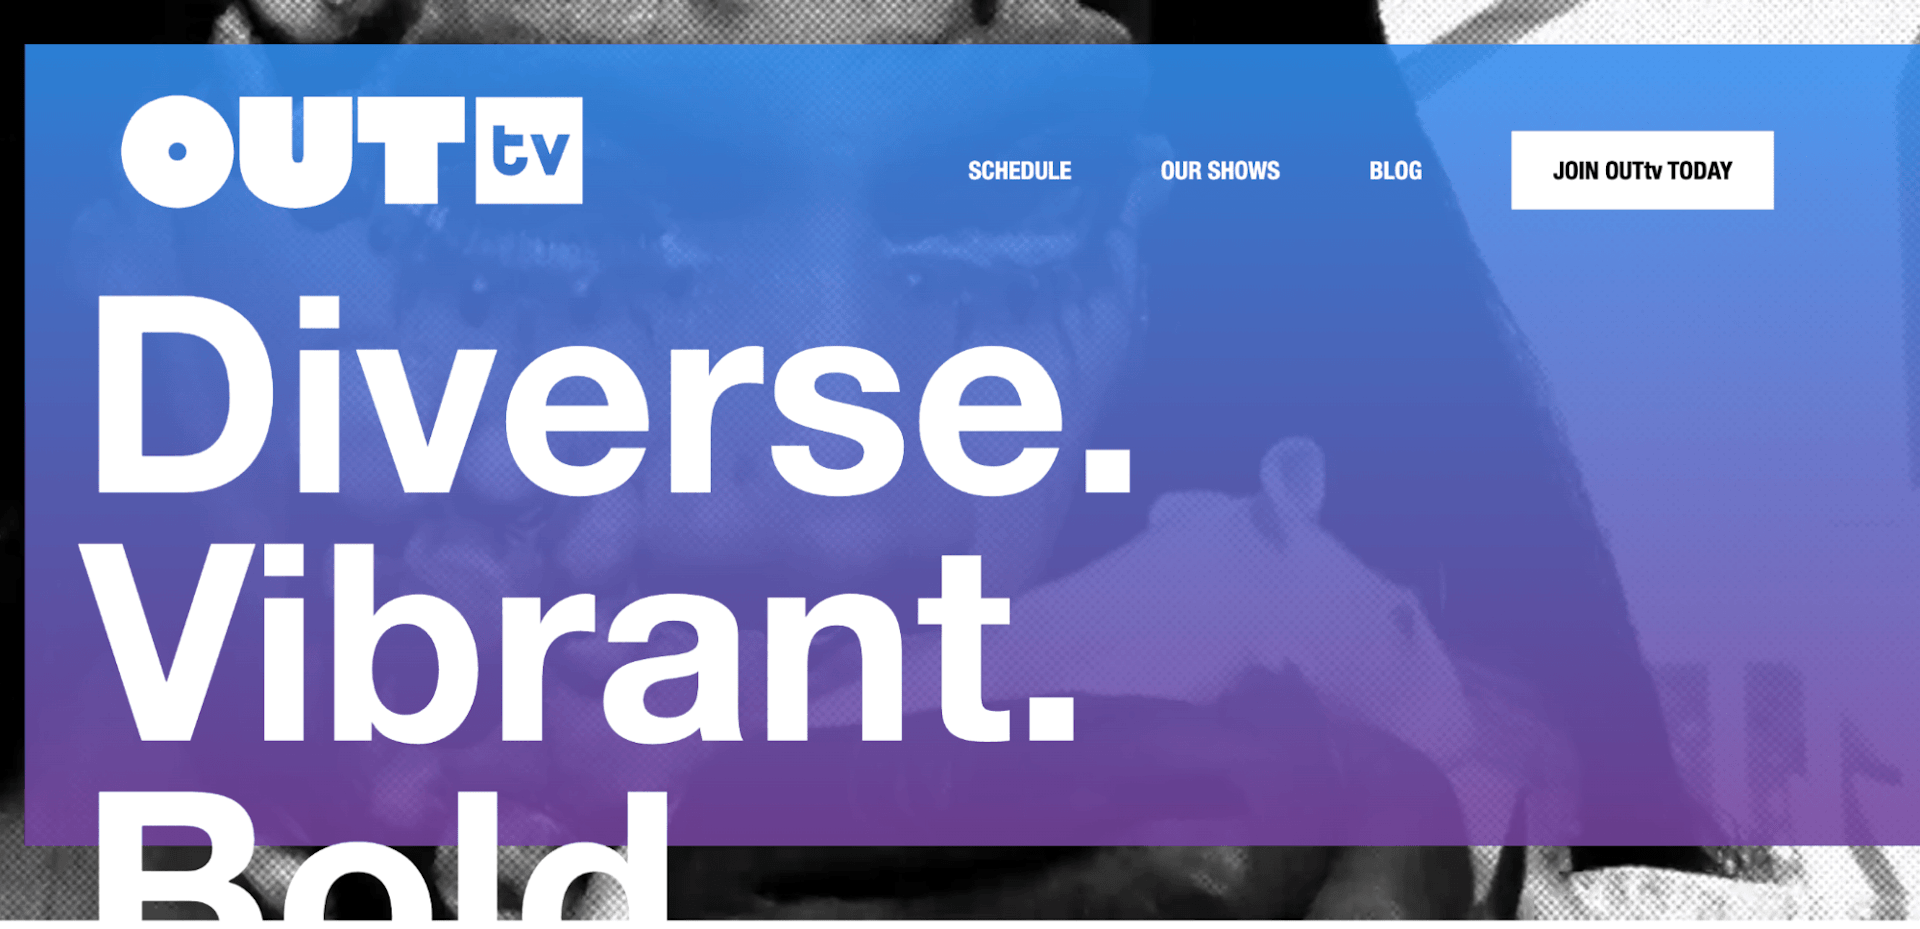 OUttv streaming service screenshot